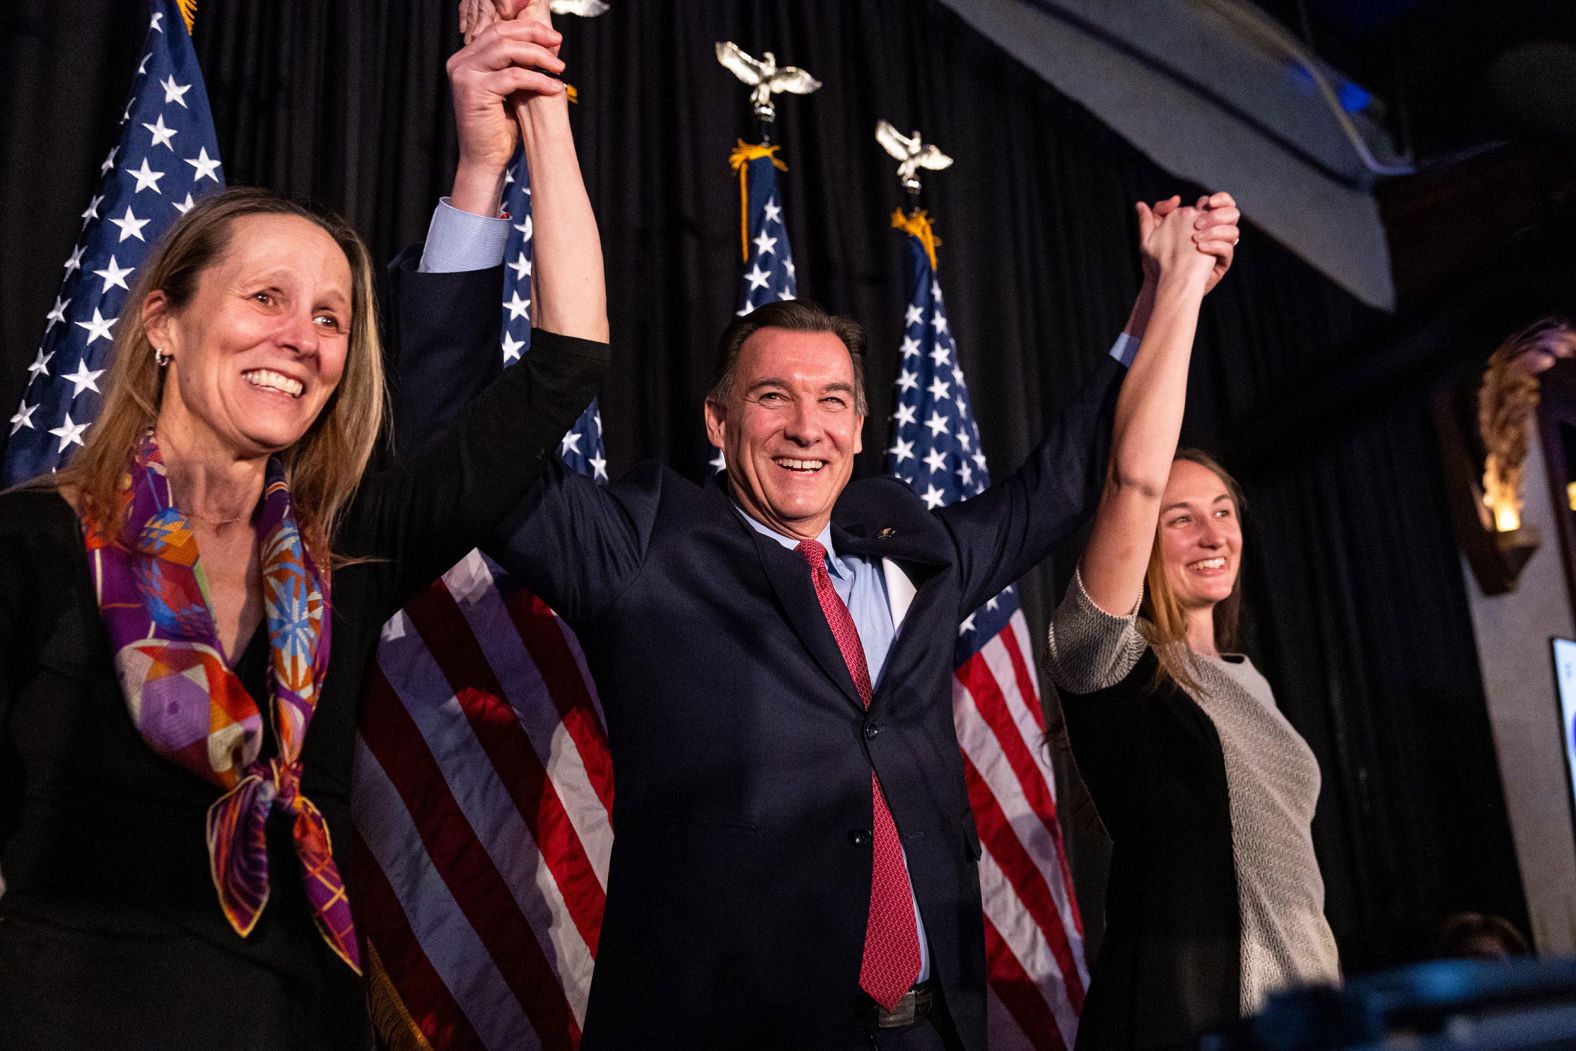 Former US Rep. Tom Suozzi appears with his wife, Helene, and his daughter, Caroline, at an election night party in Woodbury, New York, on Tuesday, February 13. Suozzi, a Democrat, <a href="index.php?page=&url=https%3A%2F%2Fwww.cnn.com%2F2024%2F02%2F13%2Fpolitics%2Fsantos-seat-tom-suozzi-mazi-pilip%2Findex.html" target="_blank">won the special election to replace disgraced Republican George Santos</a> in the House of Representatives. The result will further shrink the House GOP's narrow majority.